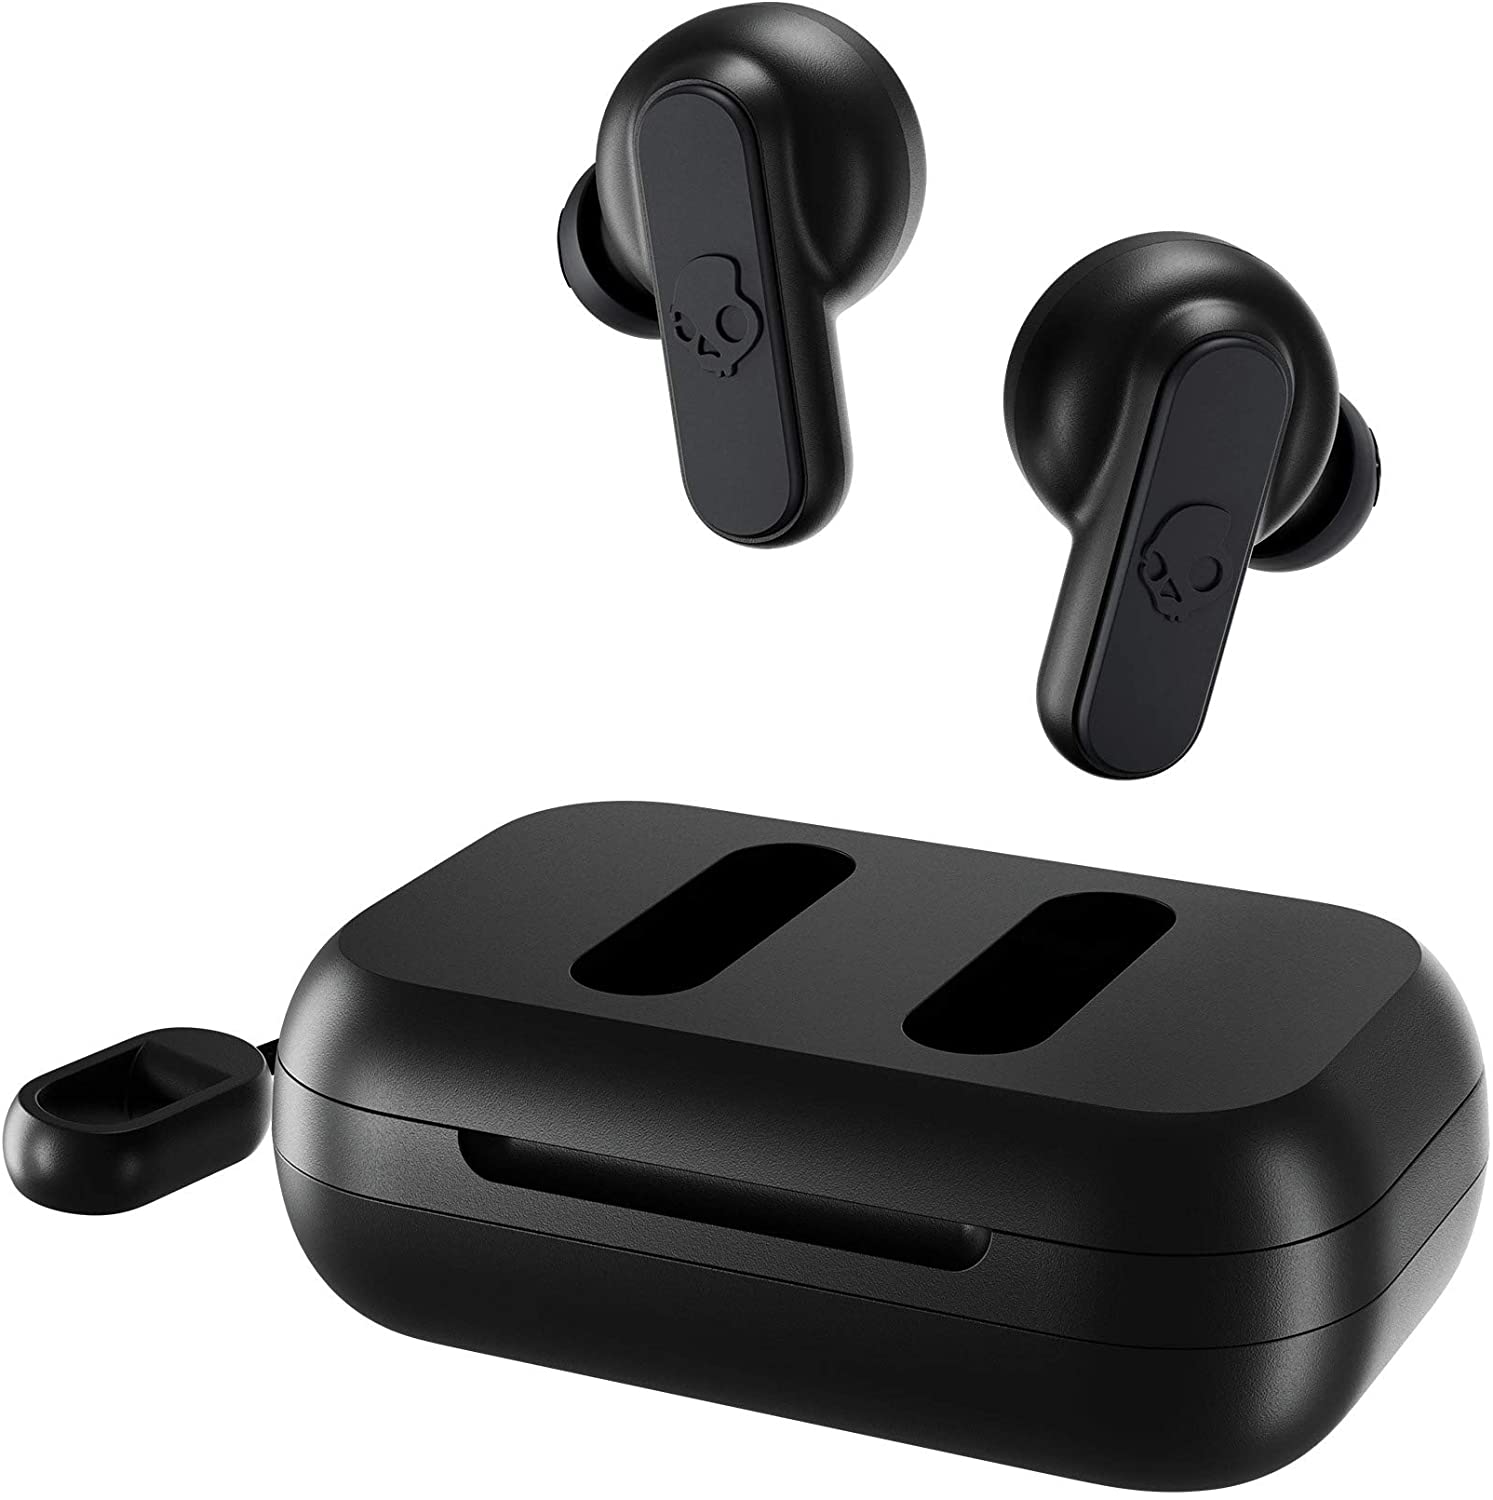 simple-steps-to-reset-skullcandy-wireless-earbuds